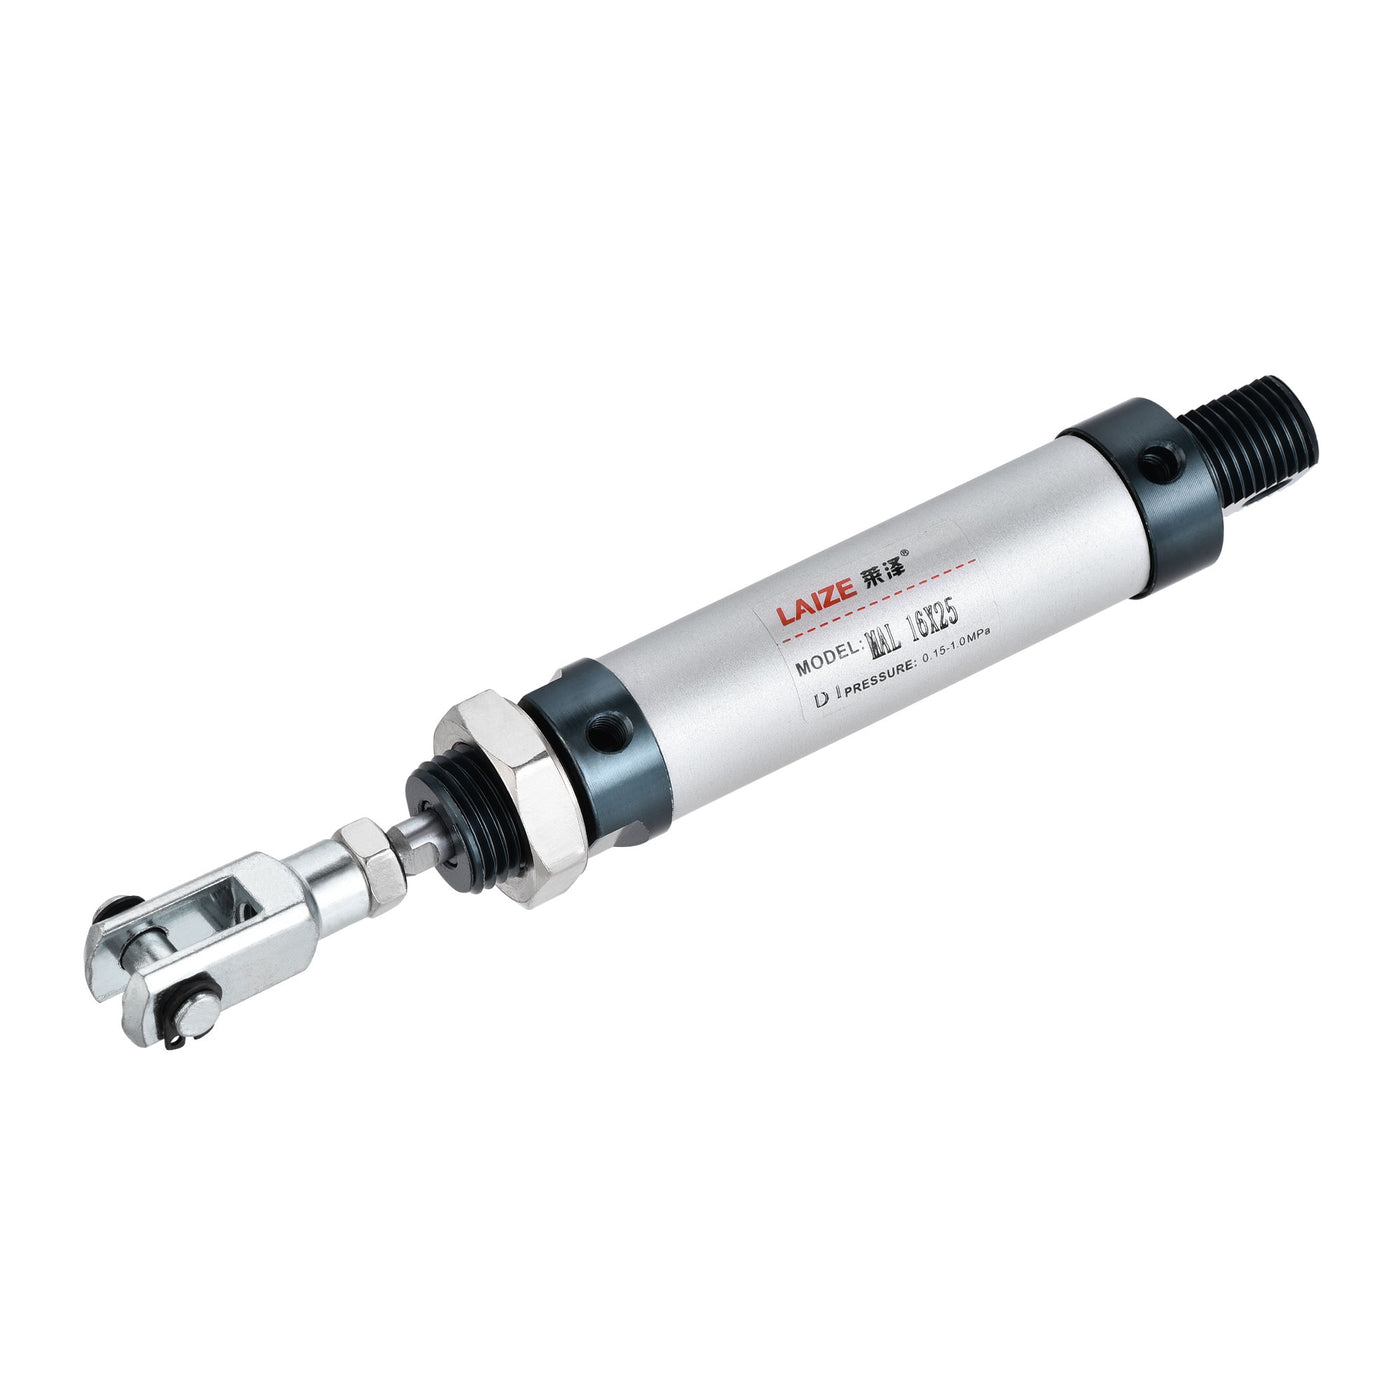 uxcell Uxcell Pneumatic Air Cylinder 16mm Bore 25mm Stroke with Y Connector and Quick Fittings, MAL 16x25, for Automatic Equipment